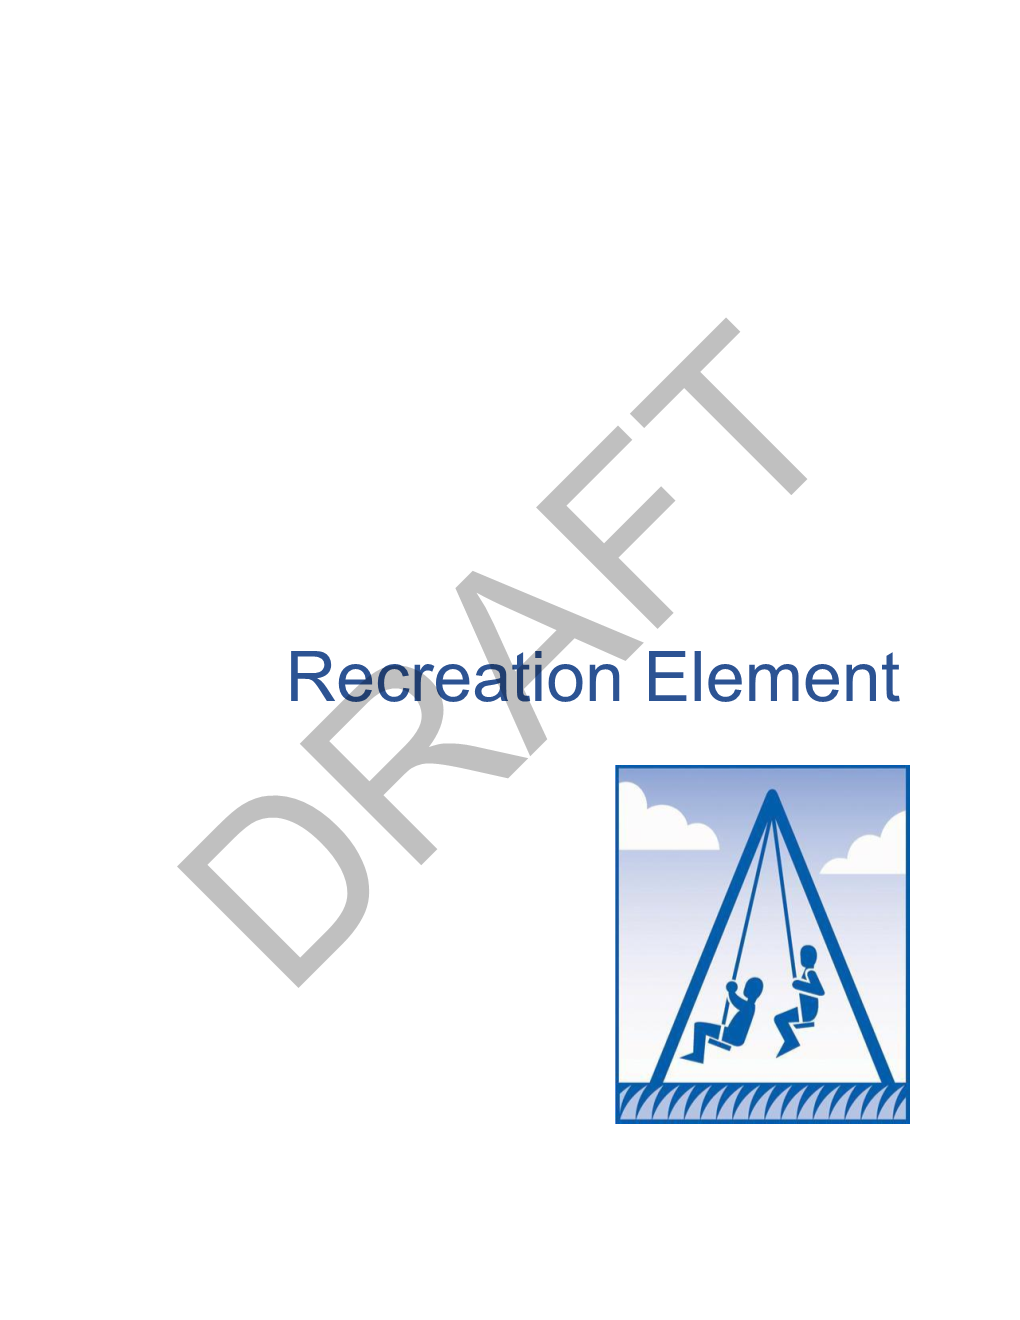 Draft Revisions to General Plan Recreation Element